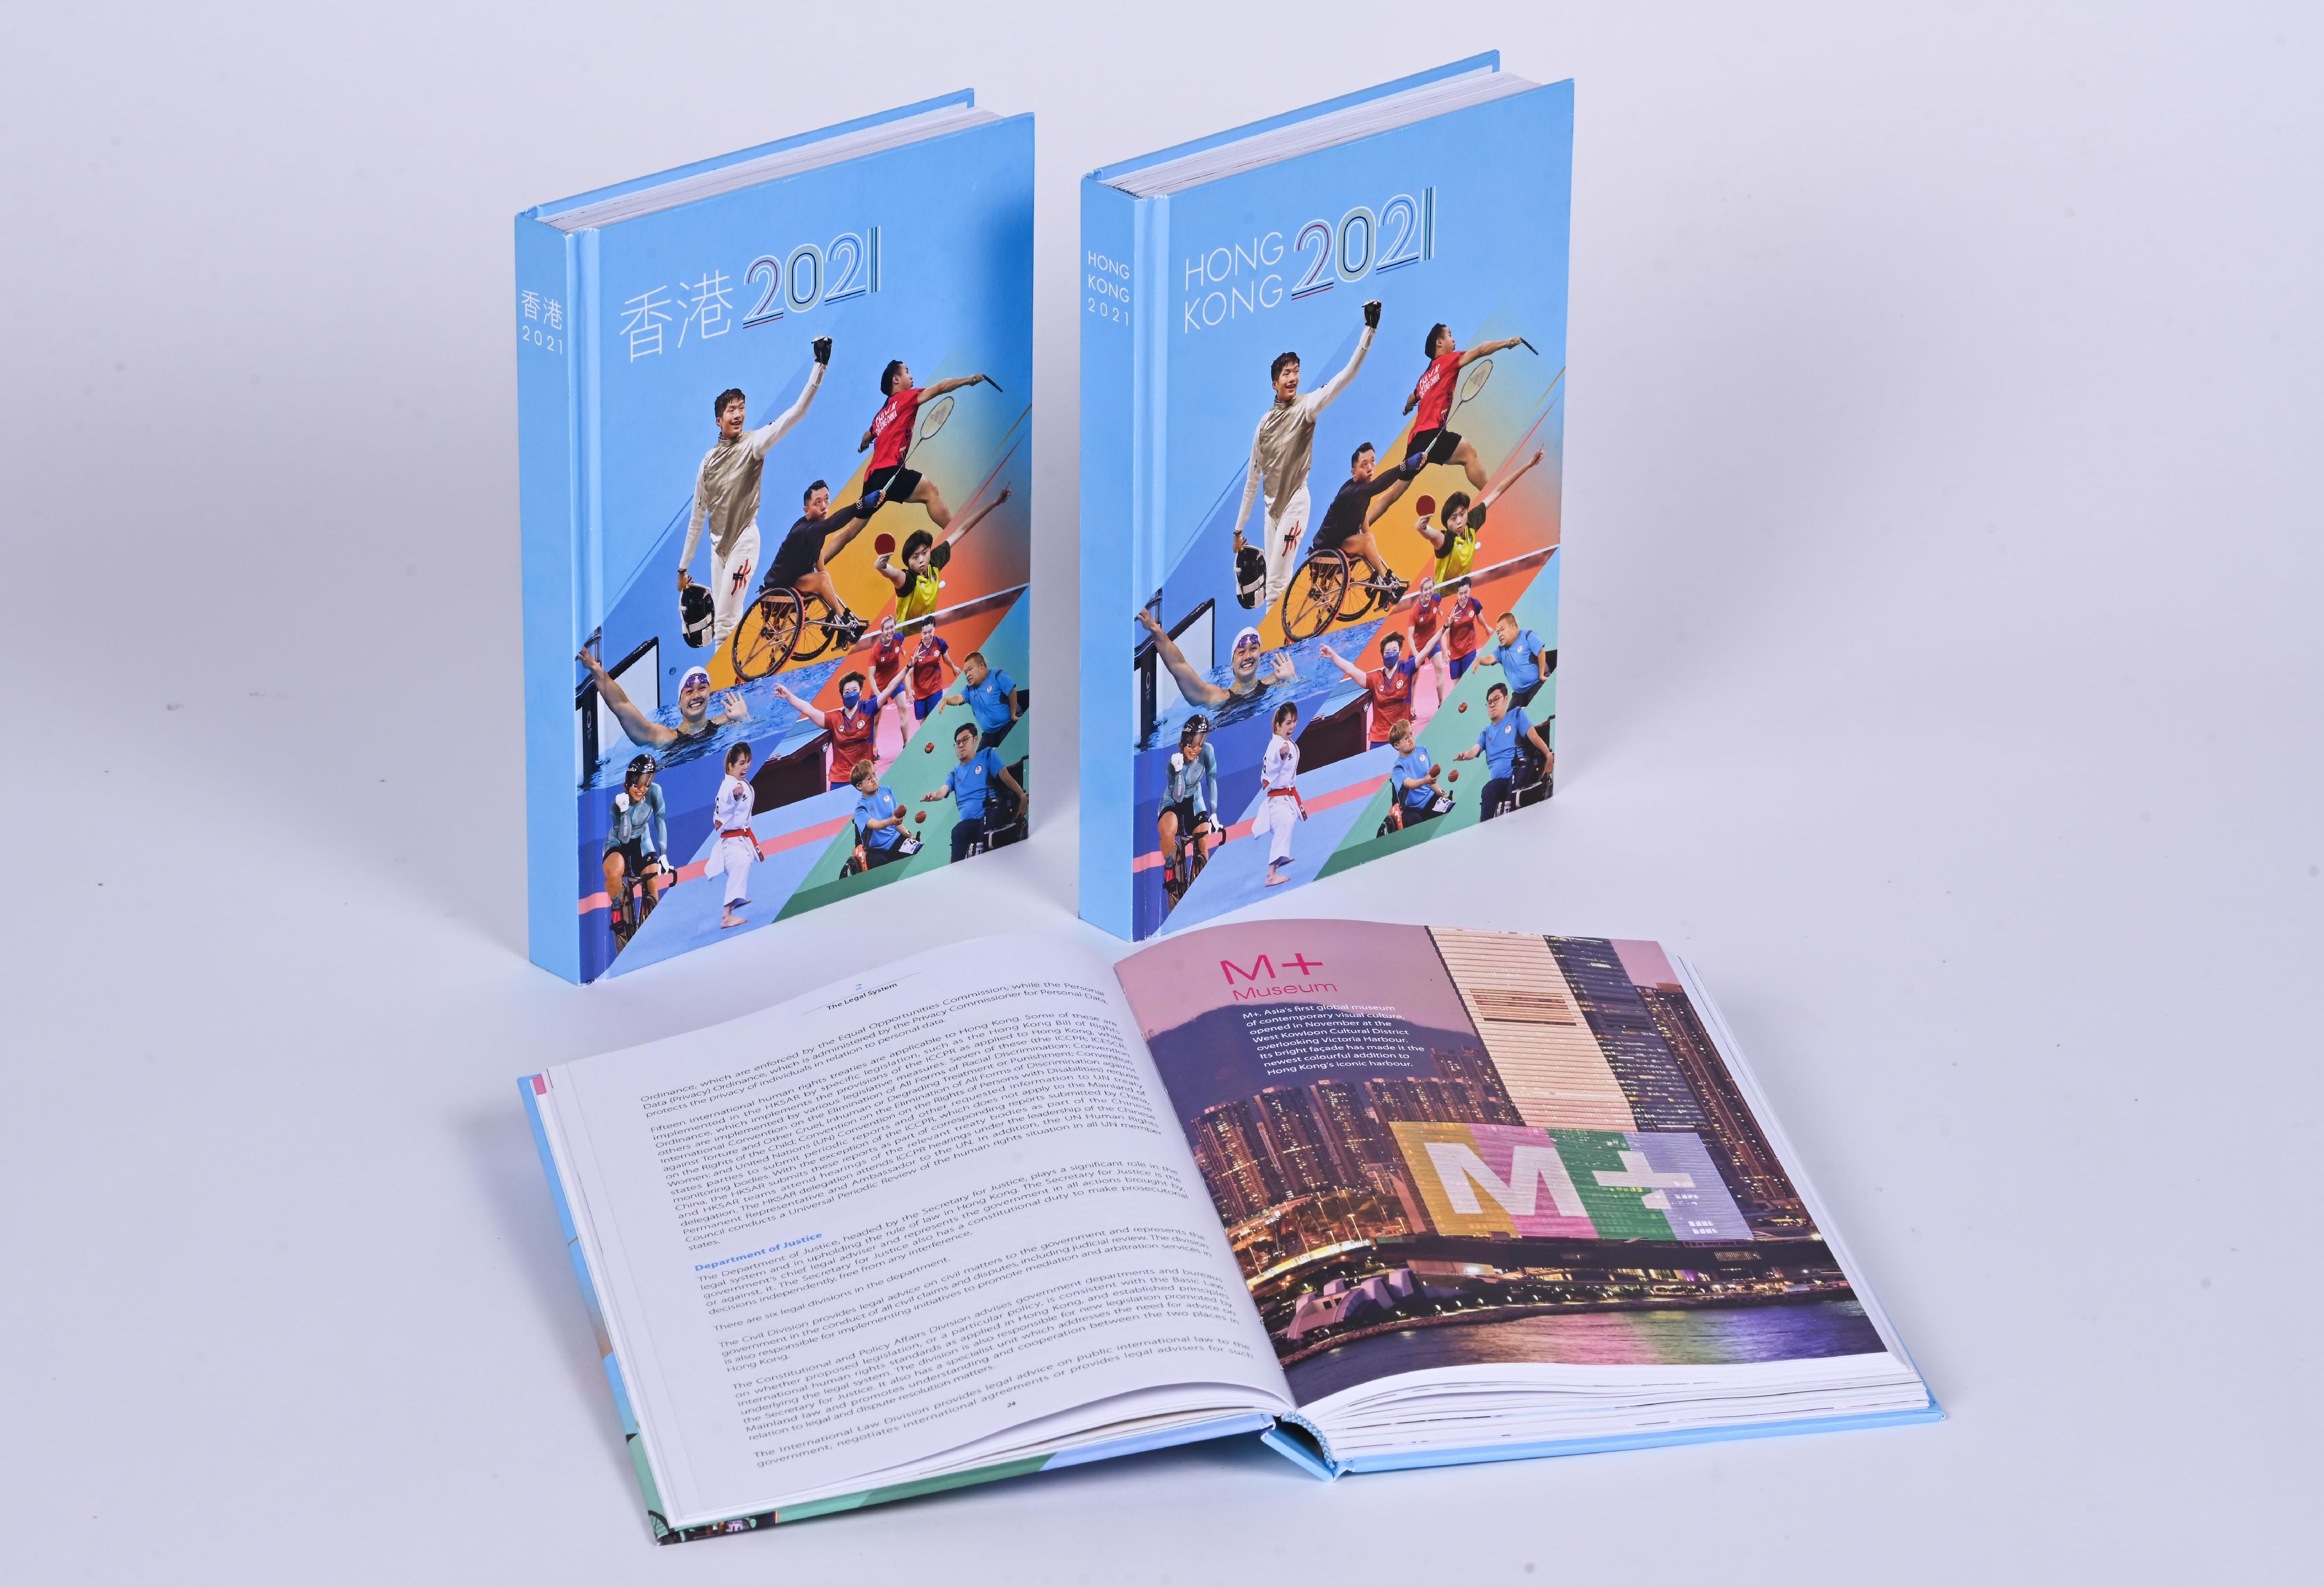 The Government's latest yearbook, "Hong Kong 2021", goes on sale today (September 7).